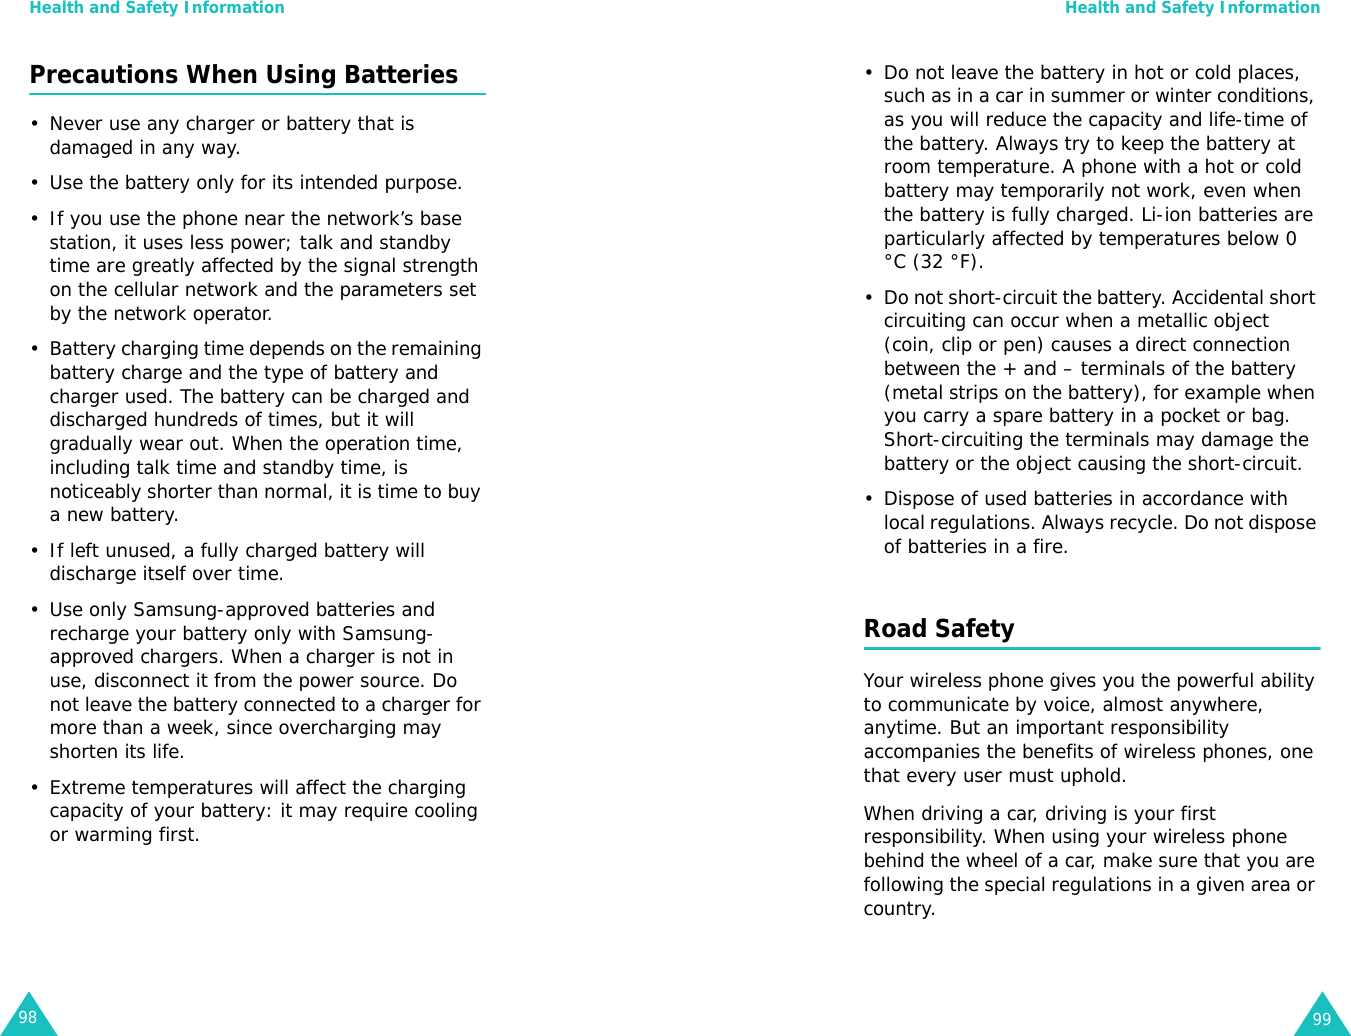 Health and Safety Information98Precautions When Using Batteries• Never use any charger or battery that is damaged in any way.• Use the battery only for its intended purpose.• If you use the phone near the network’s base station, it uses less power; talk and standby time are greatly affected by the signal strength on the cellular network and the parameters set by the network operator.• Battery charging time depends on the remaining battery charge and the type of battery and charger used. The battery can be charged and discharged hundreds of times, but it will gradually wear out. When the operation time, including talk time and standby time, is noticeably shorter than normal, it is time to buy a new battery.• If left unused, a fully charged battery will discharge itself over time.• Use only Samsung-approved batteries and recharge your battery only with Samsung-approved chargers. When a charger is not in use, disconnect it from the power source. Do not leave the battery connected to a charger for more than a week, since overcharging may shorten its life.• Extreme temperatures will affect the charging capacity of your battery: it may require cooling or warming first.Health and Safety Information99• Do not leave the battery in hot or cold places, such as in a car in summer or winter conditions, as you will reduce the capacity and life-time of the battery. Always try to keep the battery at room temperature. A phone with a hot or cold battery may temporarily not work, even when the battery is fully charged. Li-ion batteries are particularly affected by temperatures below 0 °C (32 °F).• Do not short-circuit the battery. Accidental short circuiting can occur when a metallic object (coin, clip or pen) causes a direct connection between the + and – terminals of the battery (metal strips on the battery), for example when you carry a spare battery in a pocket or bag. Short-circuiting the terminals may damage the battery or the object causing the short-circuit.• Dispose of used batteries in accordance with local regulations. Always recycle. Do not dispose of batteries in a fire.Road SafetyYour wireless phone gives you the powerful ability to communicate by voice, almost anywhere, anytime. But an important responsibility accompanies the benefits of wireless phones, one that every user must uphold.When driving a car, driving is your first responsibility. When using your wireless phone behind the wheel of a car, make sure that you are following the special regulations in a given area or country.